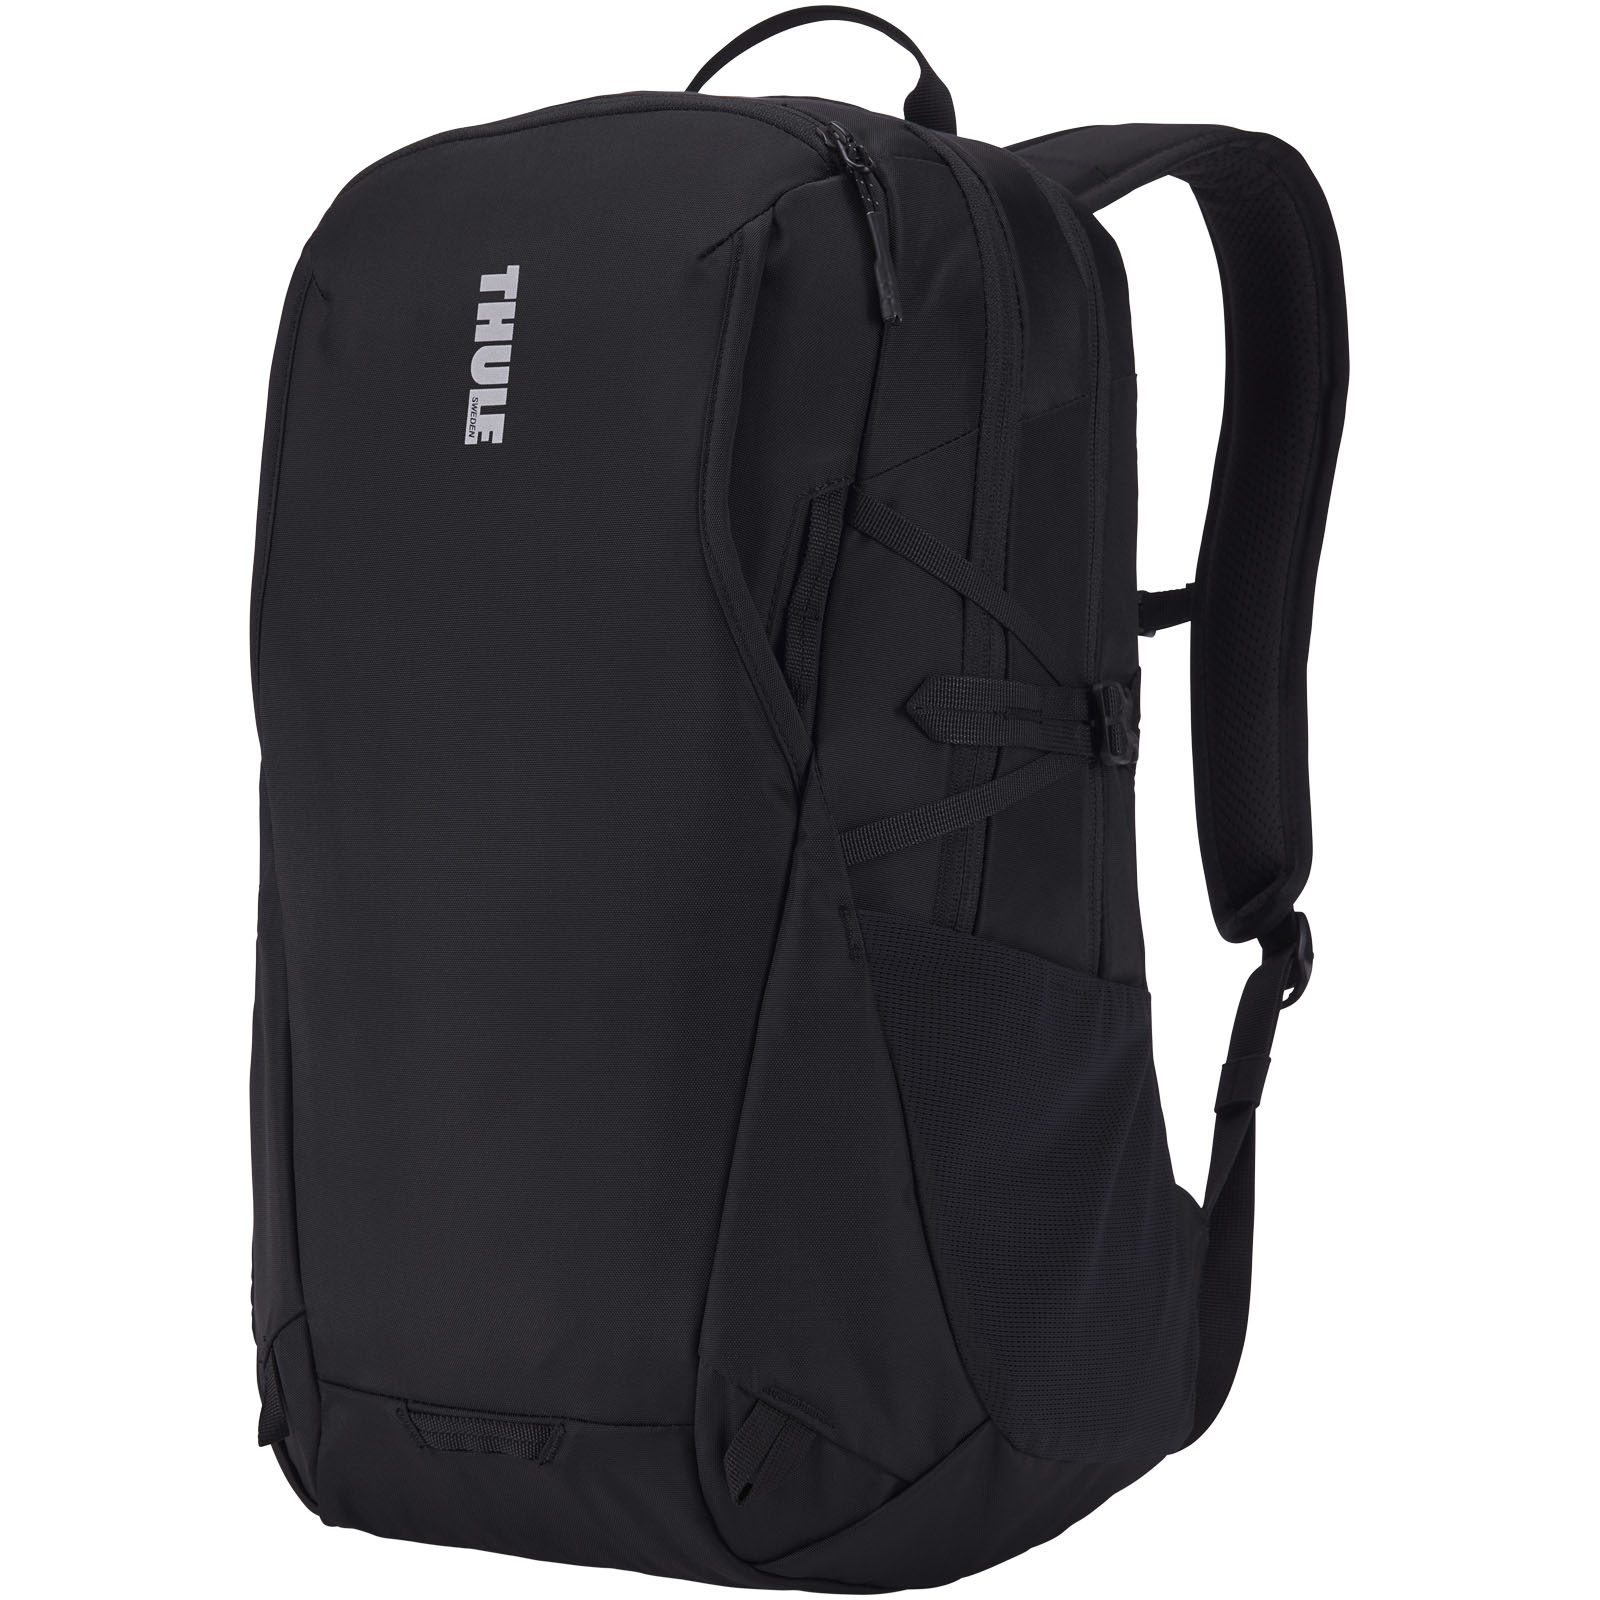 Branded outdoor backpack Thule ENROUTE 23 - solid black